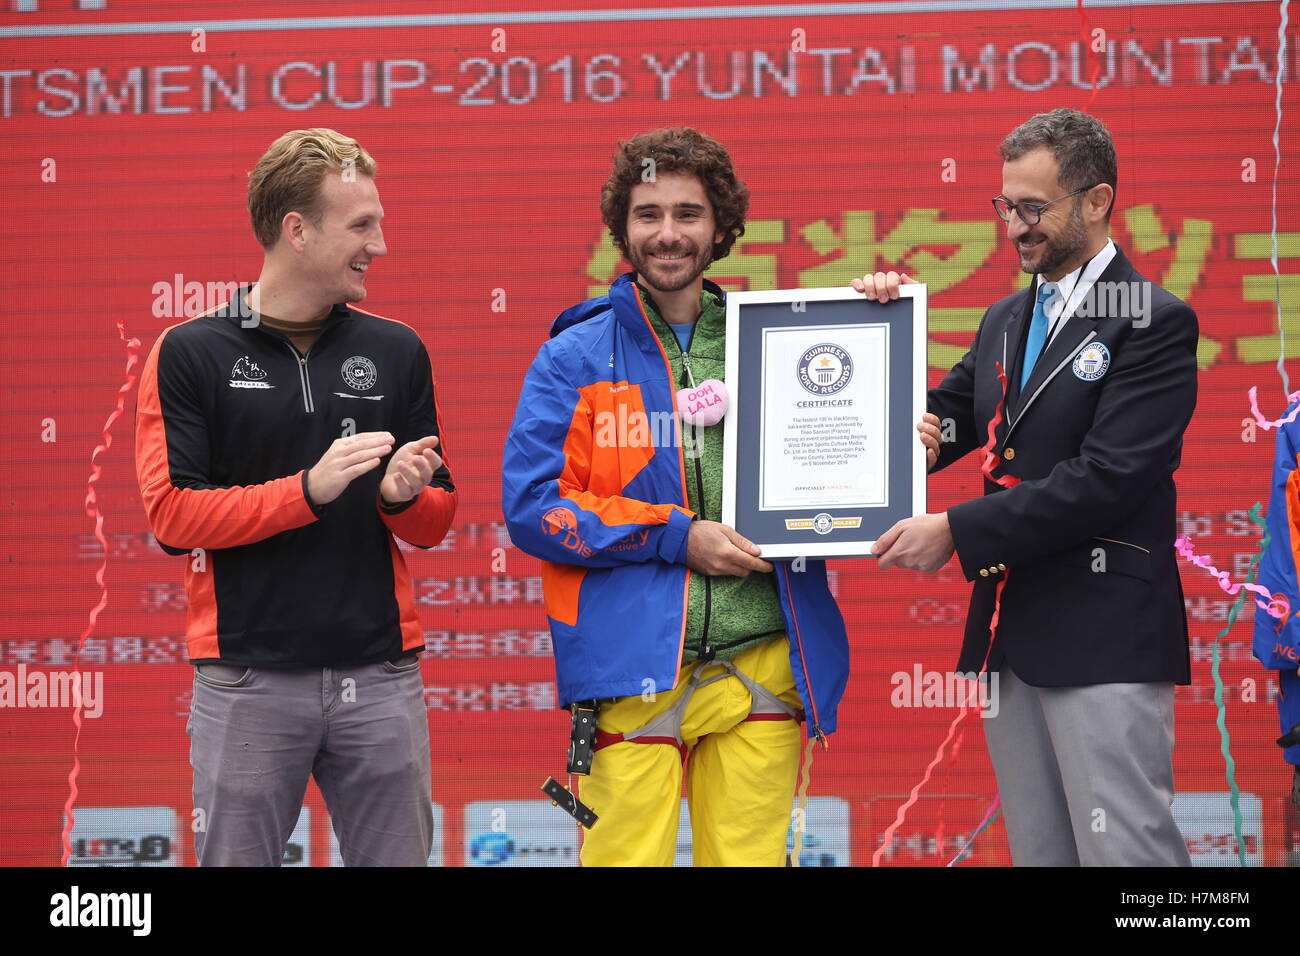 Jiaozuo, China. 6th Nov, 2016.  Jim Daniel Sanson, a 29-year-old slackline walker from France, receives the award after he breaks the Guinness World Record of slackline backward walking in Yuntai Mountain in Jiaozuo, central China's Henan Province, November 6th, 2016. The Guinness World Records Challenge Competition of Backward Walking on Slackline was held in Yuntai Mountain, Jiaozuo, Henan Province on November 6th, 2016. Credit:  ZUMA Press, Inc./Alamy Live News Stock Photo